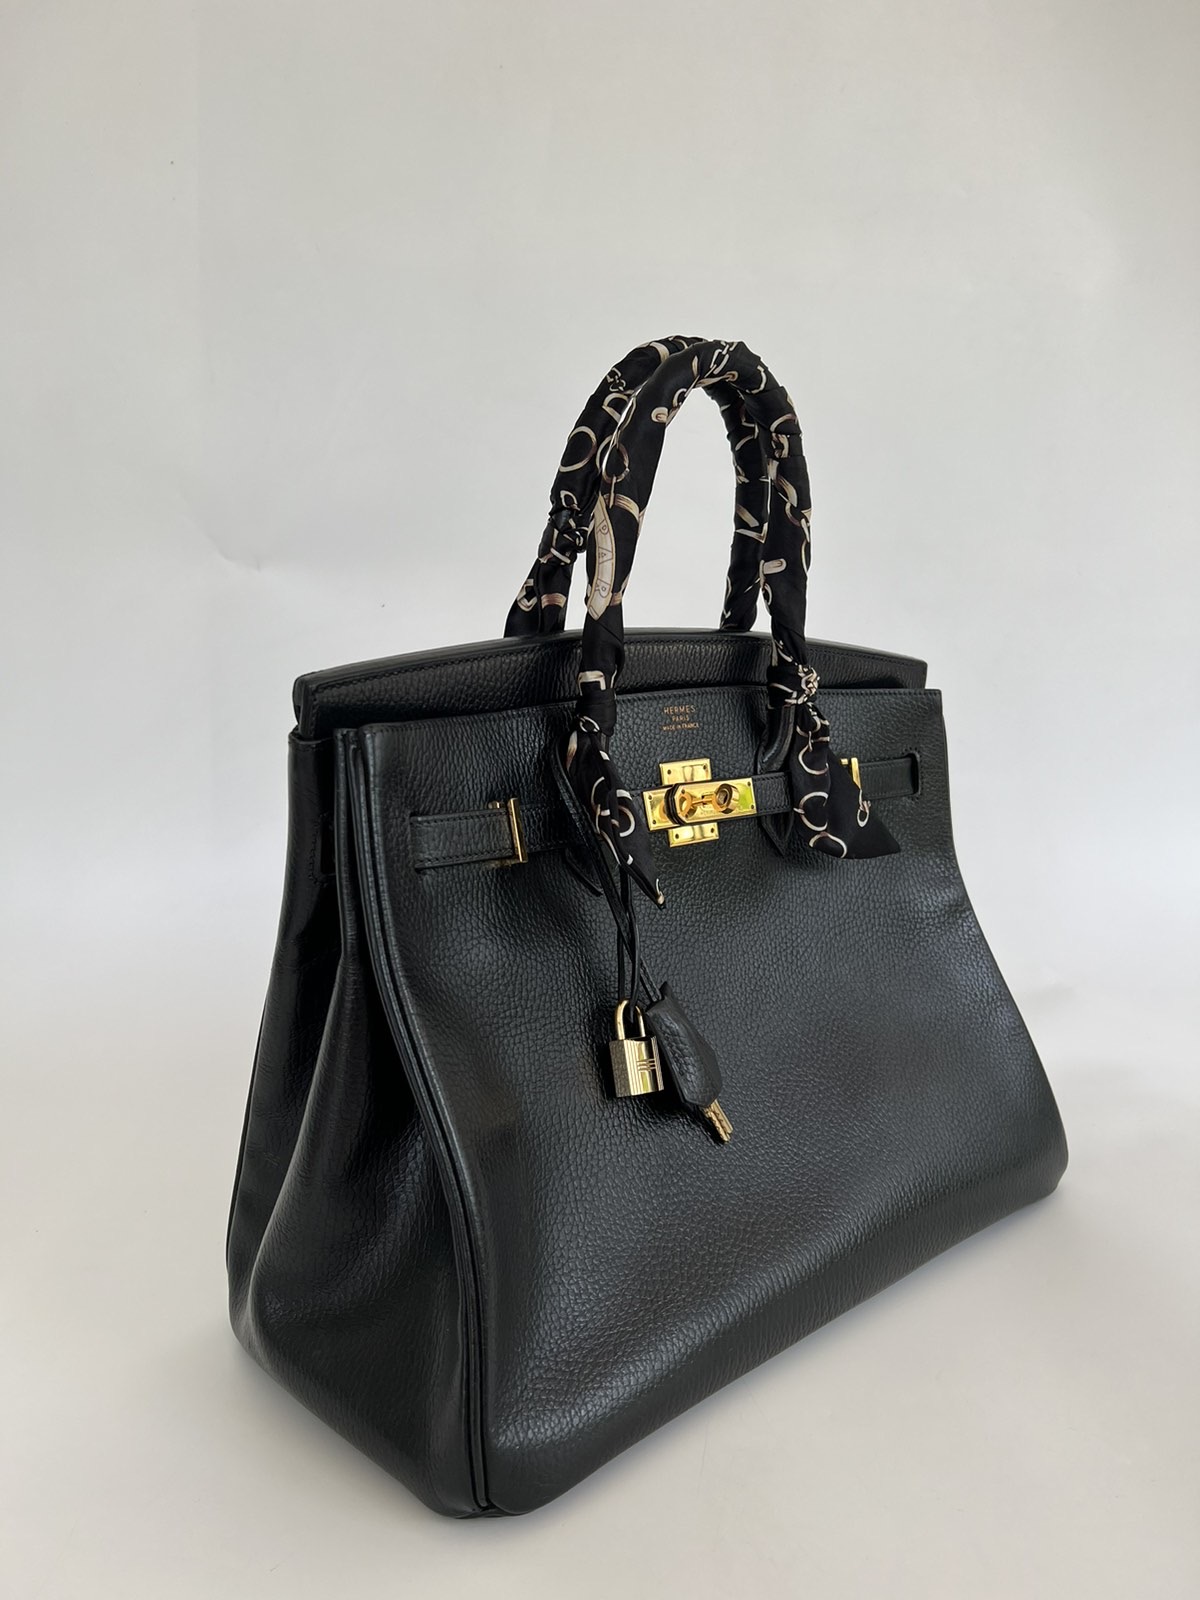 Hermes Black Birkin 35 Gold Hardware. Made in France. With clochette, lock  & key, dustbag and certificate of authenticity from ENTRUPY ❤️